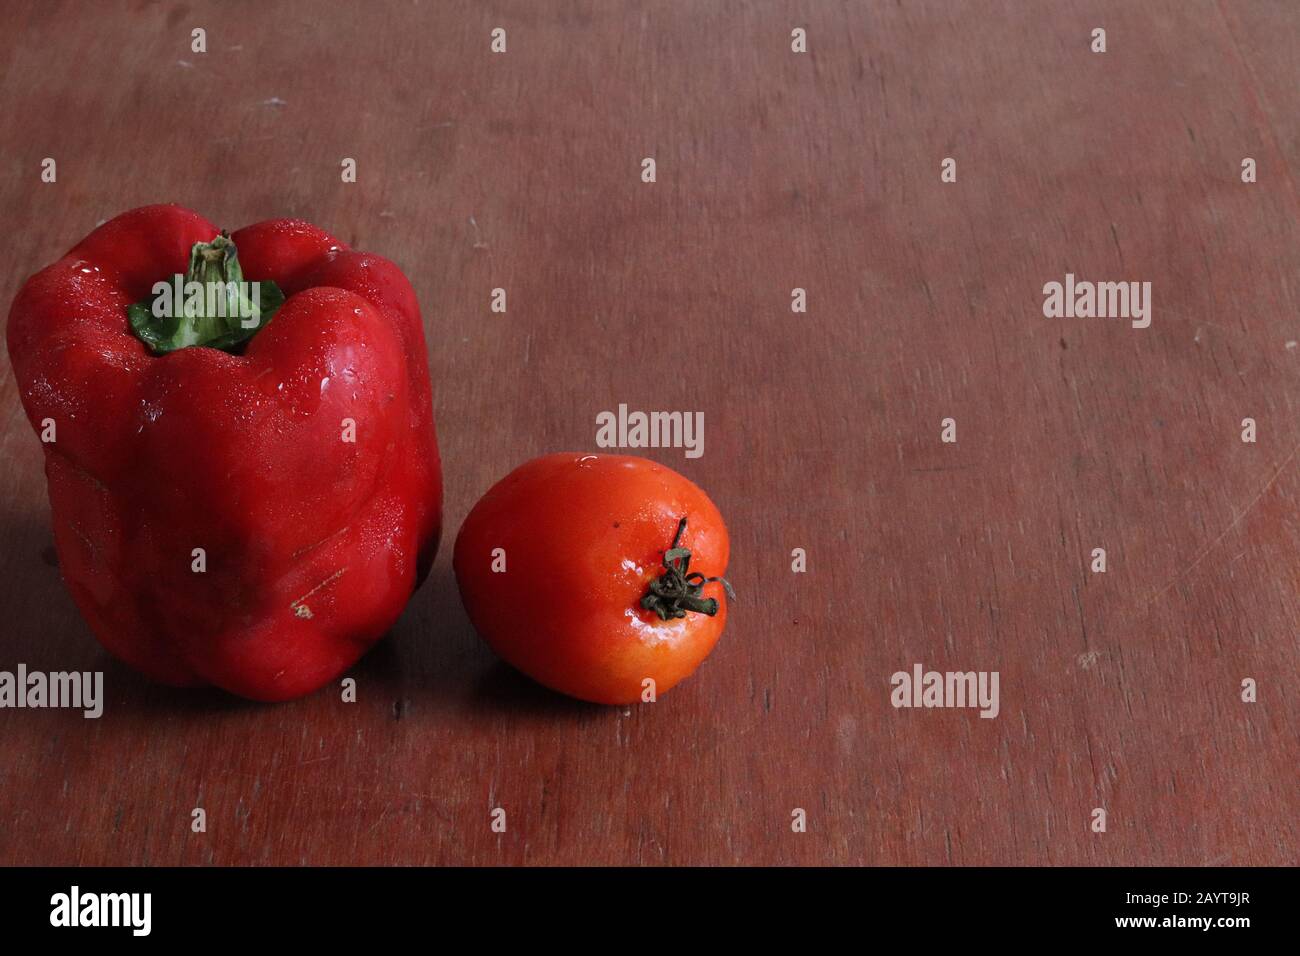 Red paprika and tomato against a wooden background to show concept of healthy diet, clean eating, vegan lifestyle and gastronomy Stock Photo